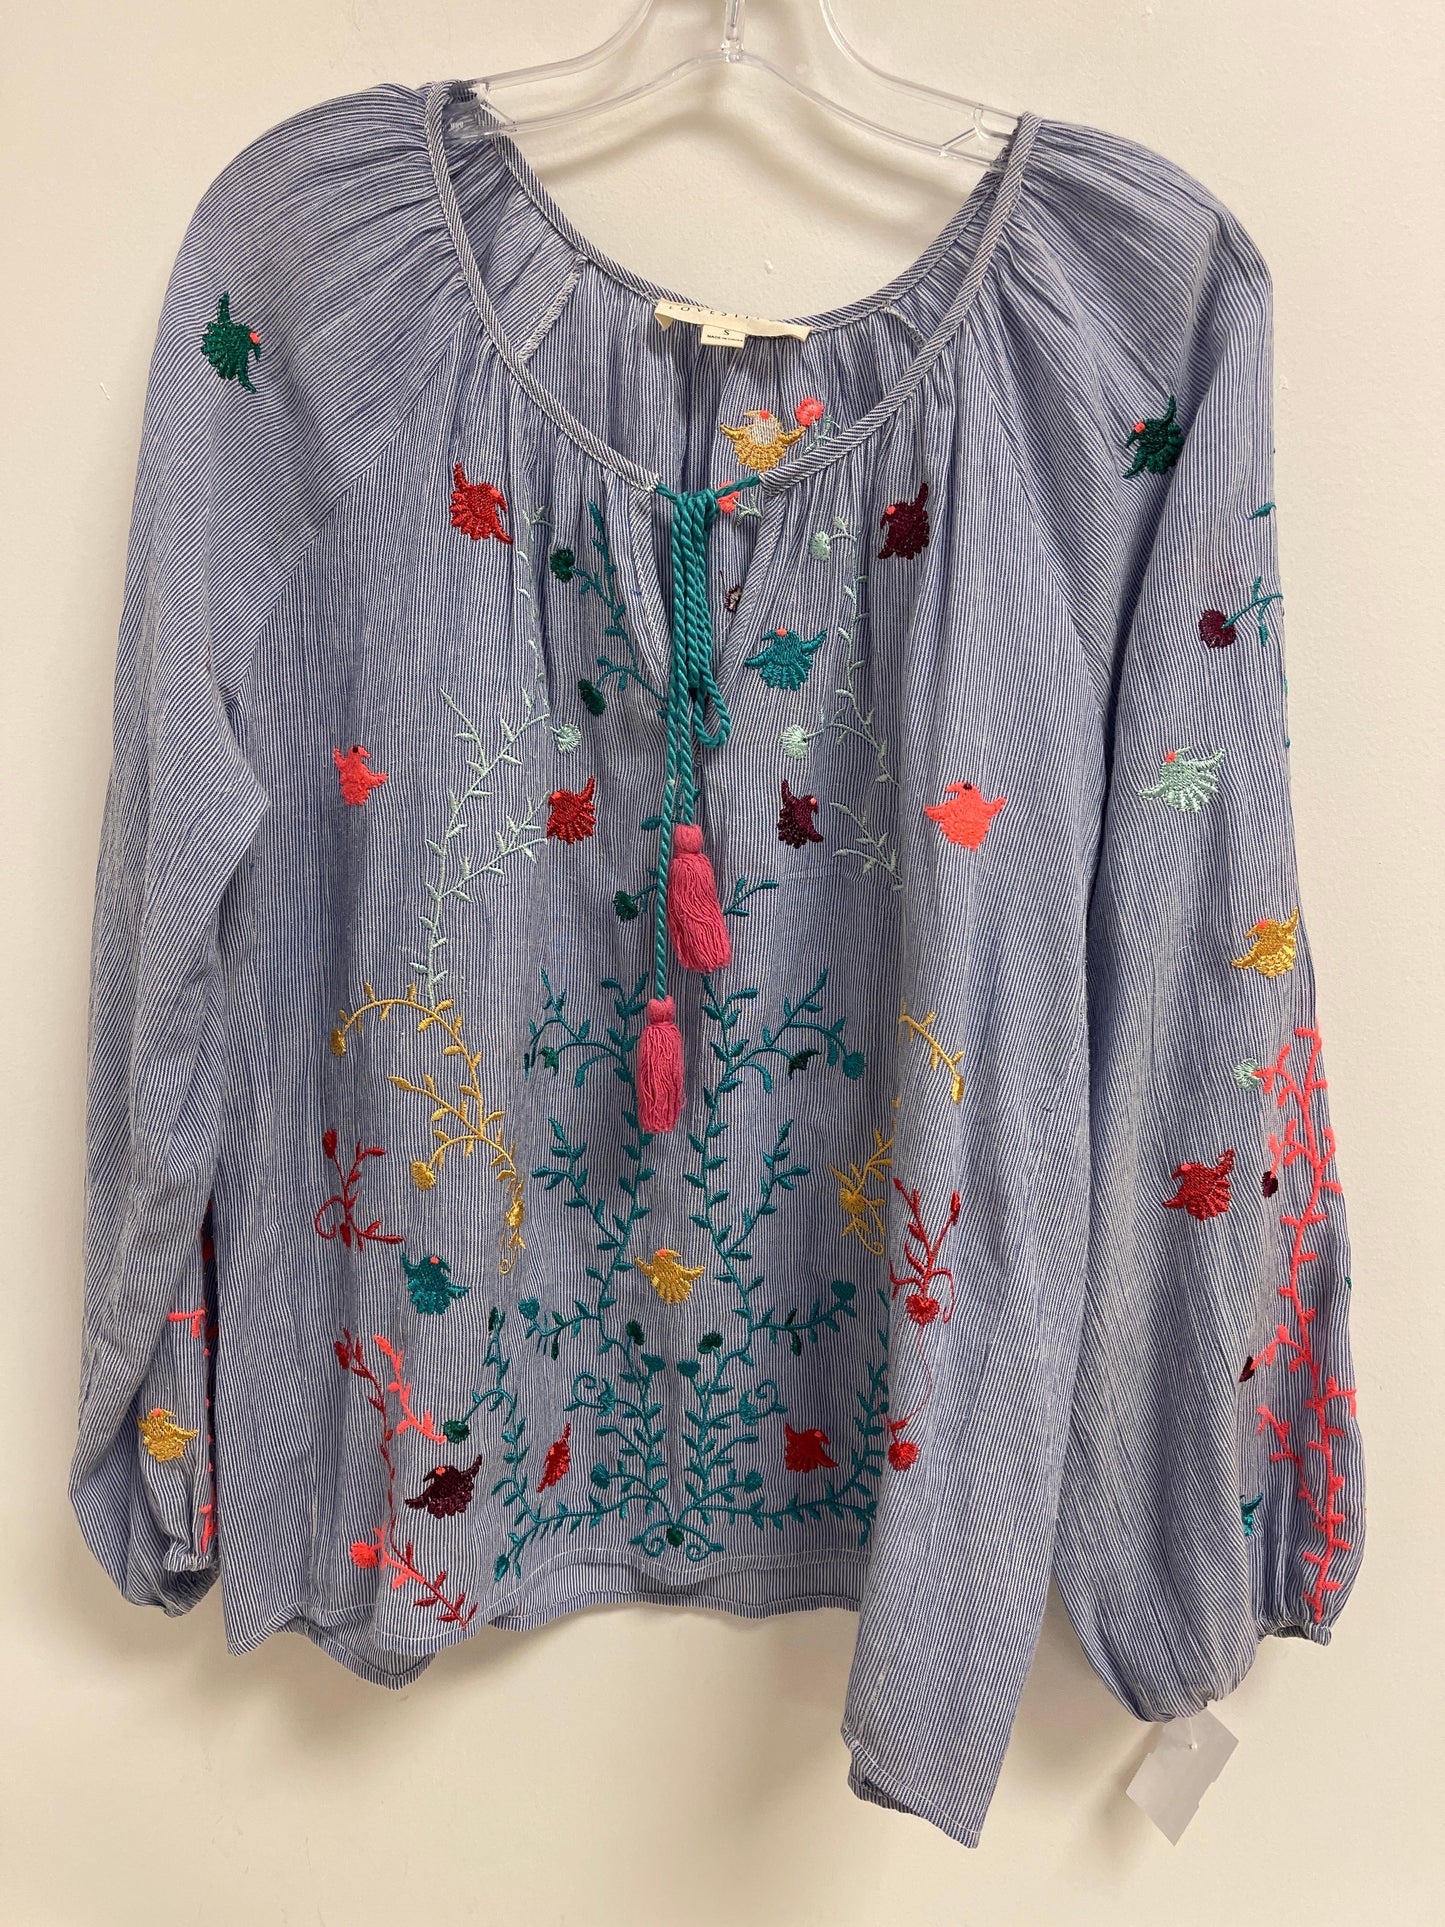 Blue Top Long Sleeve Love Stitch, Size S